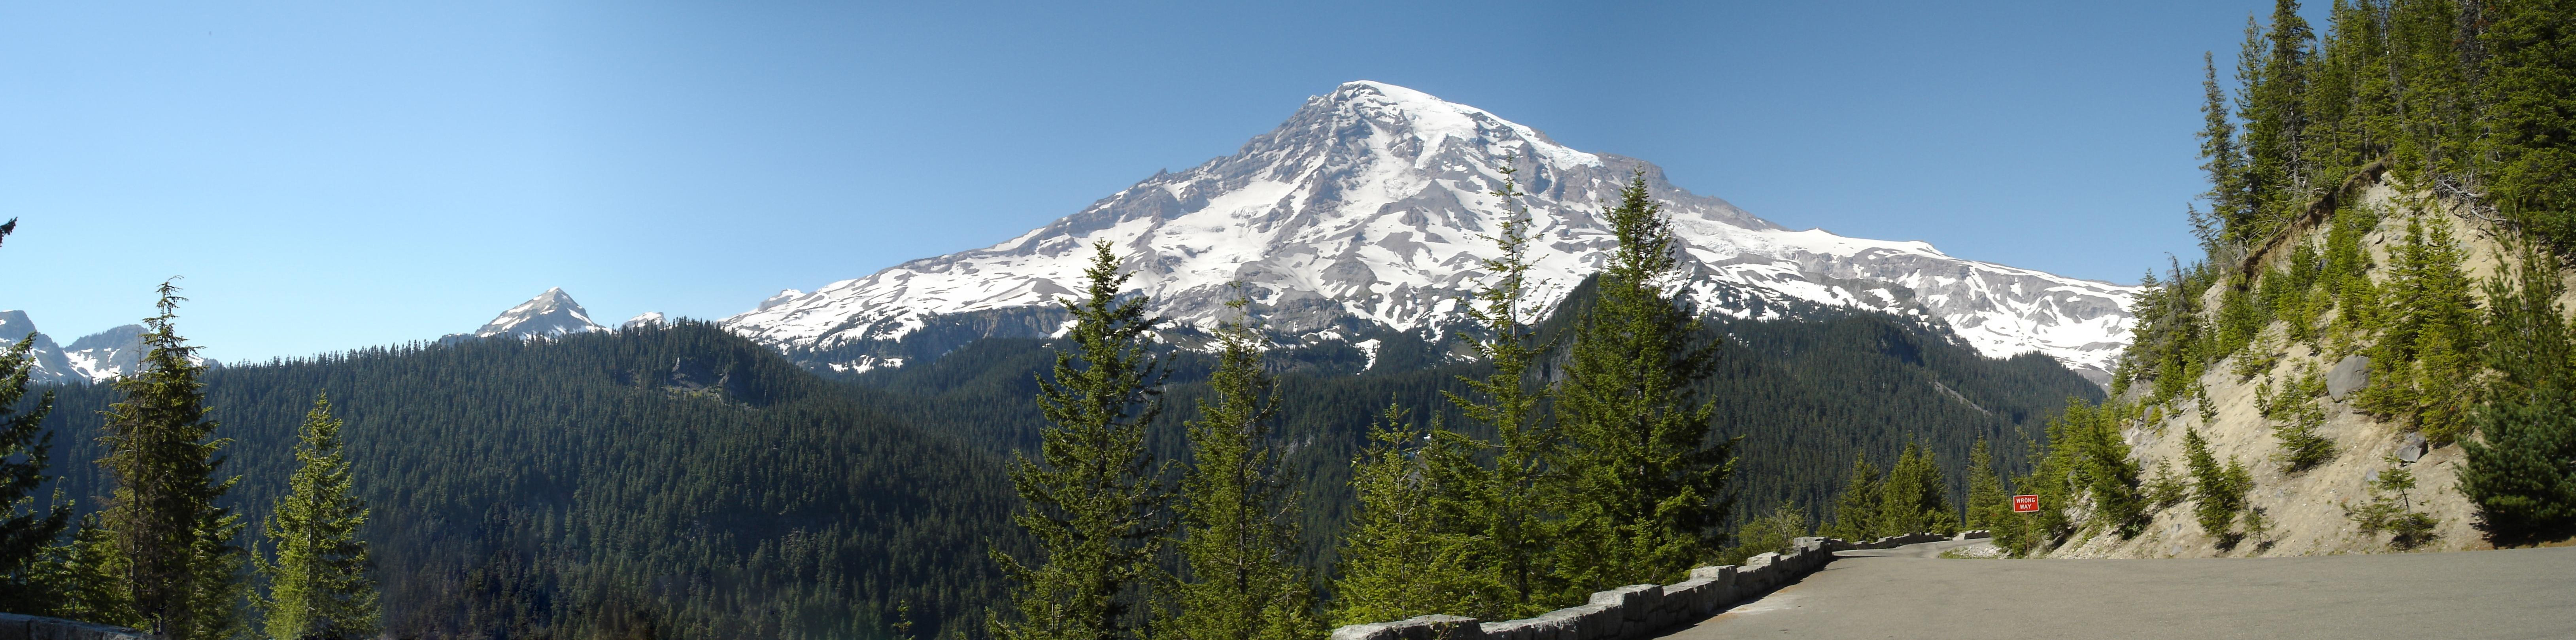 A panorama of the south face of Mount Rainier with Kautz Ice Cliff visible at center viewed from Westside Road, Washington State Route 706, Mount Rainier National Park. Photo taken on July 18, 2008.